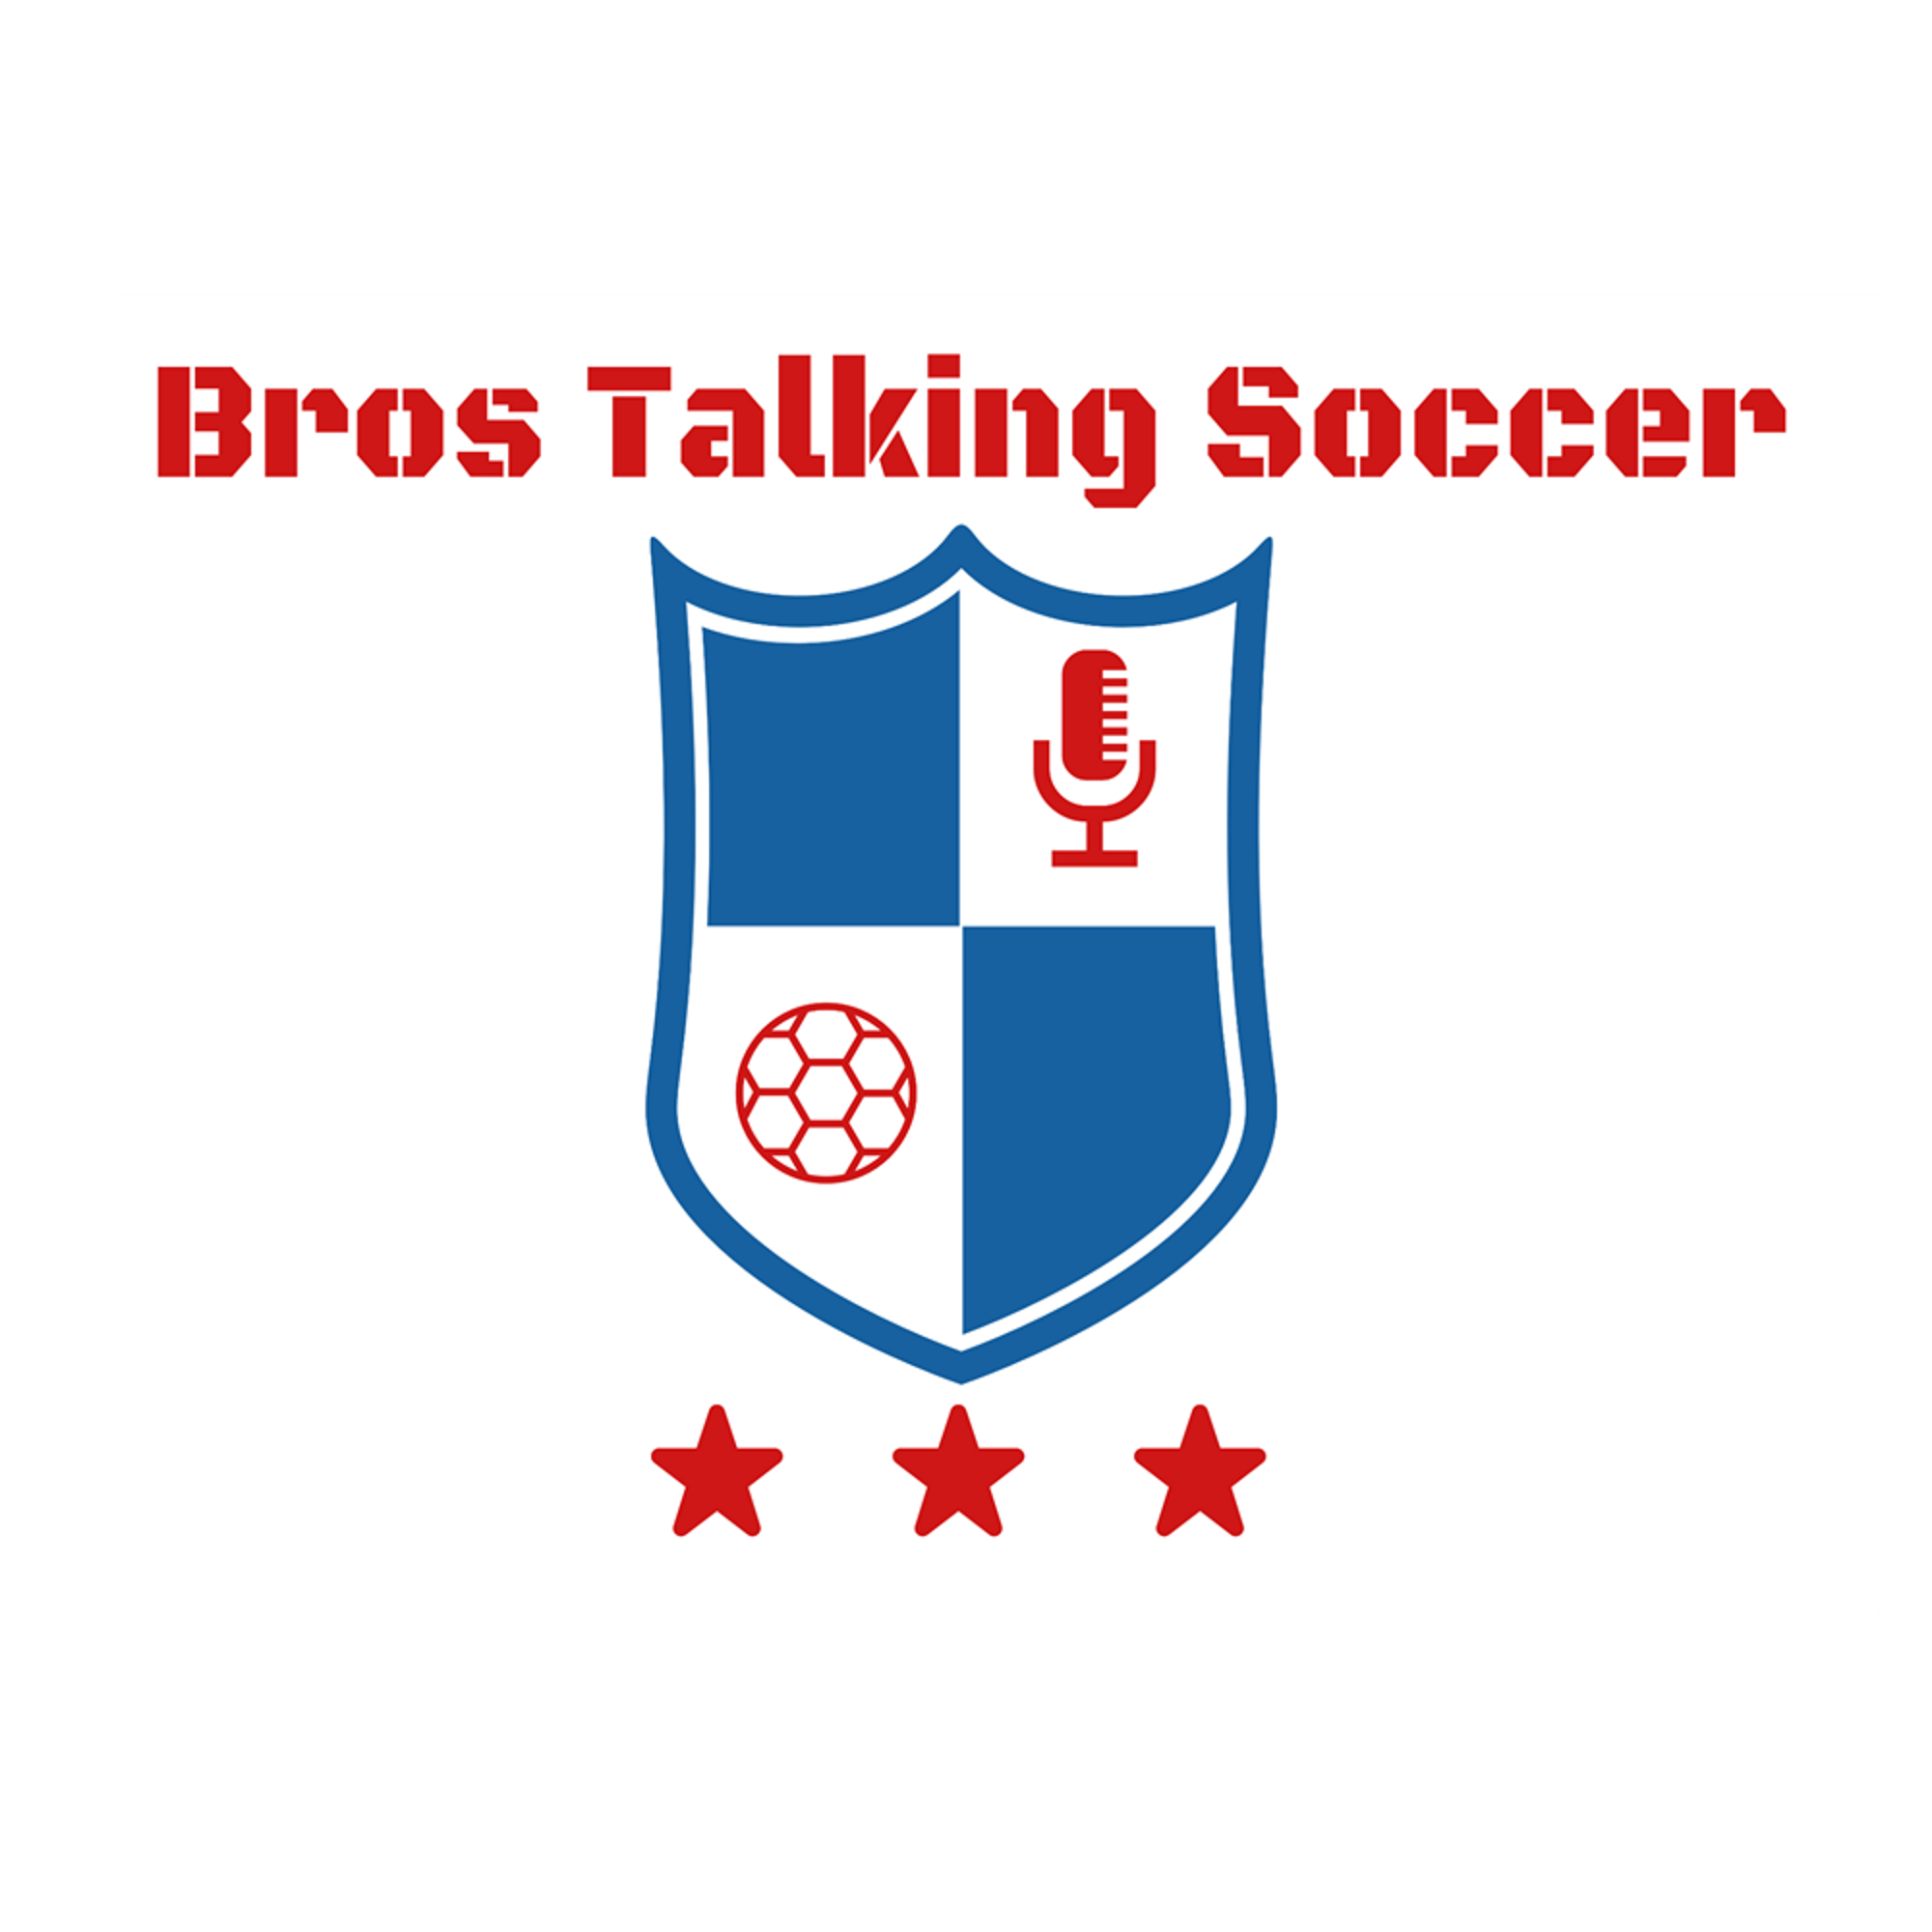 Thank You To The Bros Talking Soccer Picture